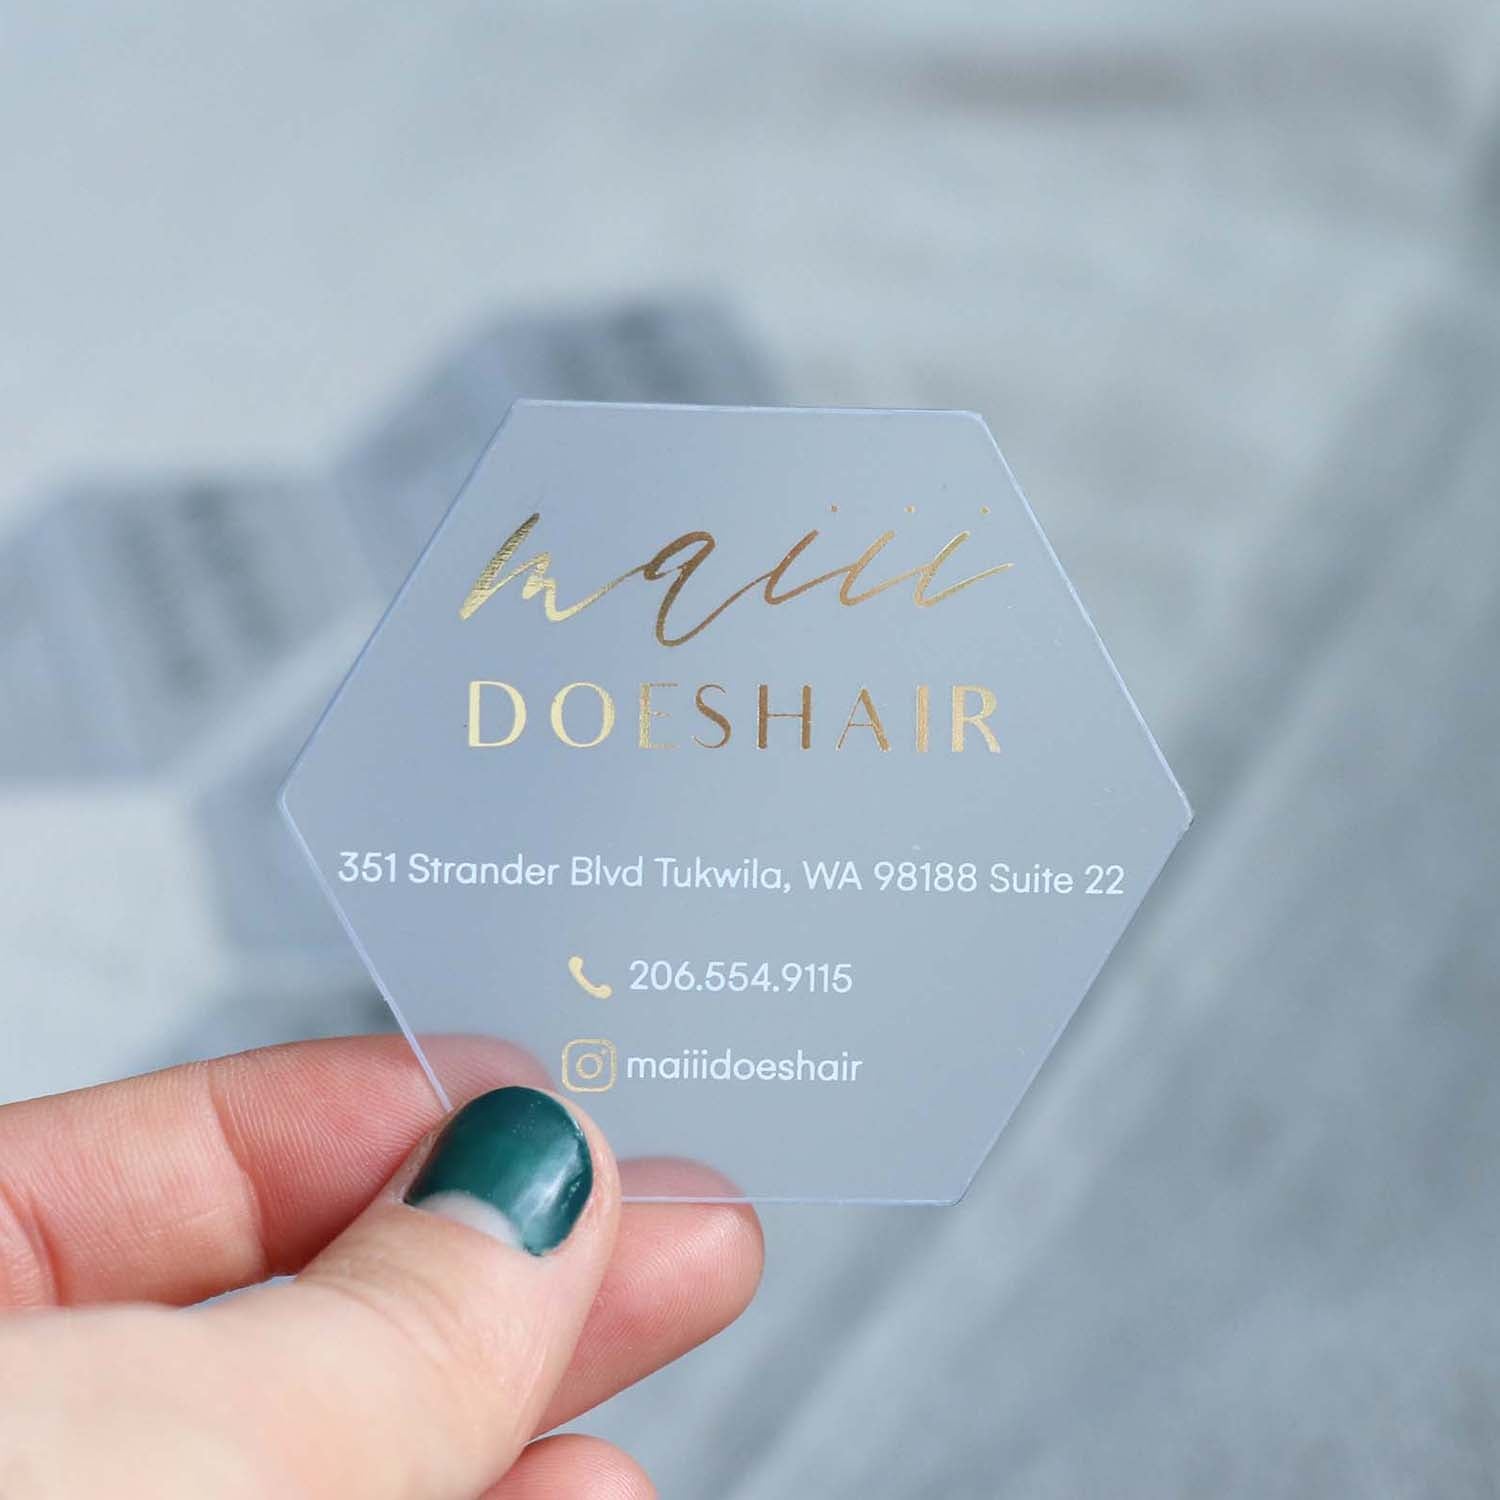 Hexagon Custom Shape Business card | Frosted Plastic Hexagon Custom Shape Business card | Frosted Plastic Business_cards, custom_shape, die-cut, exclusive, foil_stamping BcardsCreation